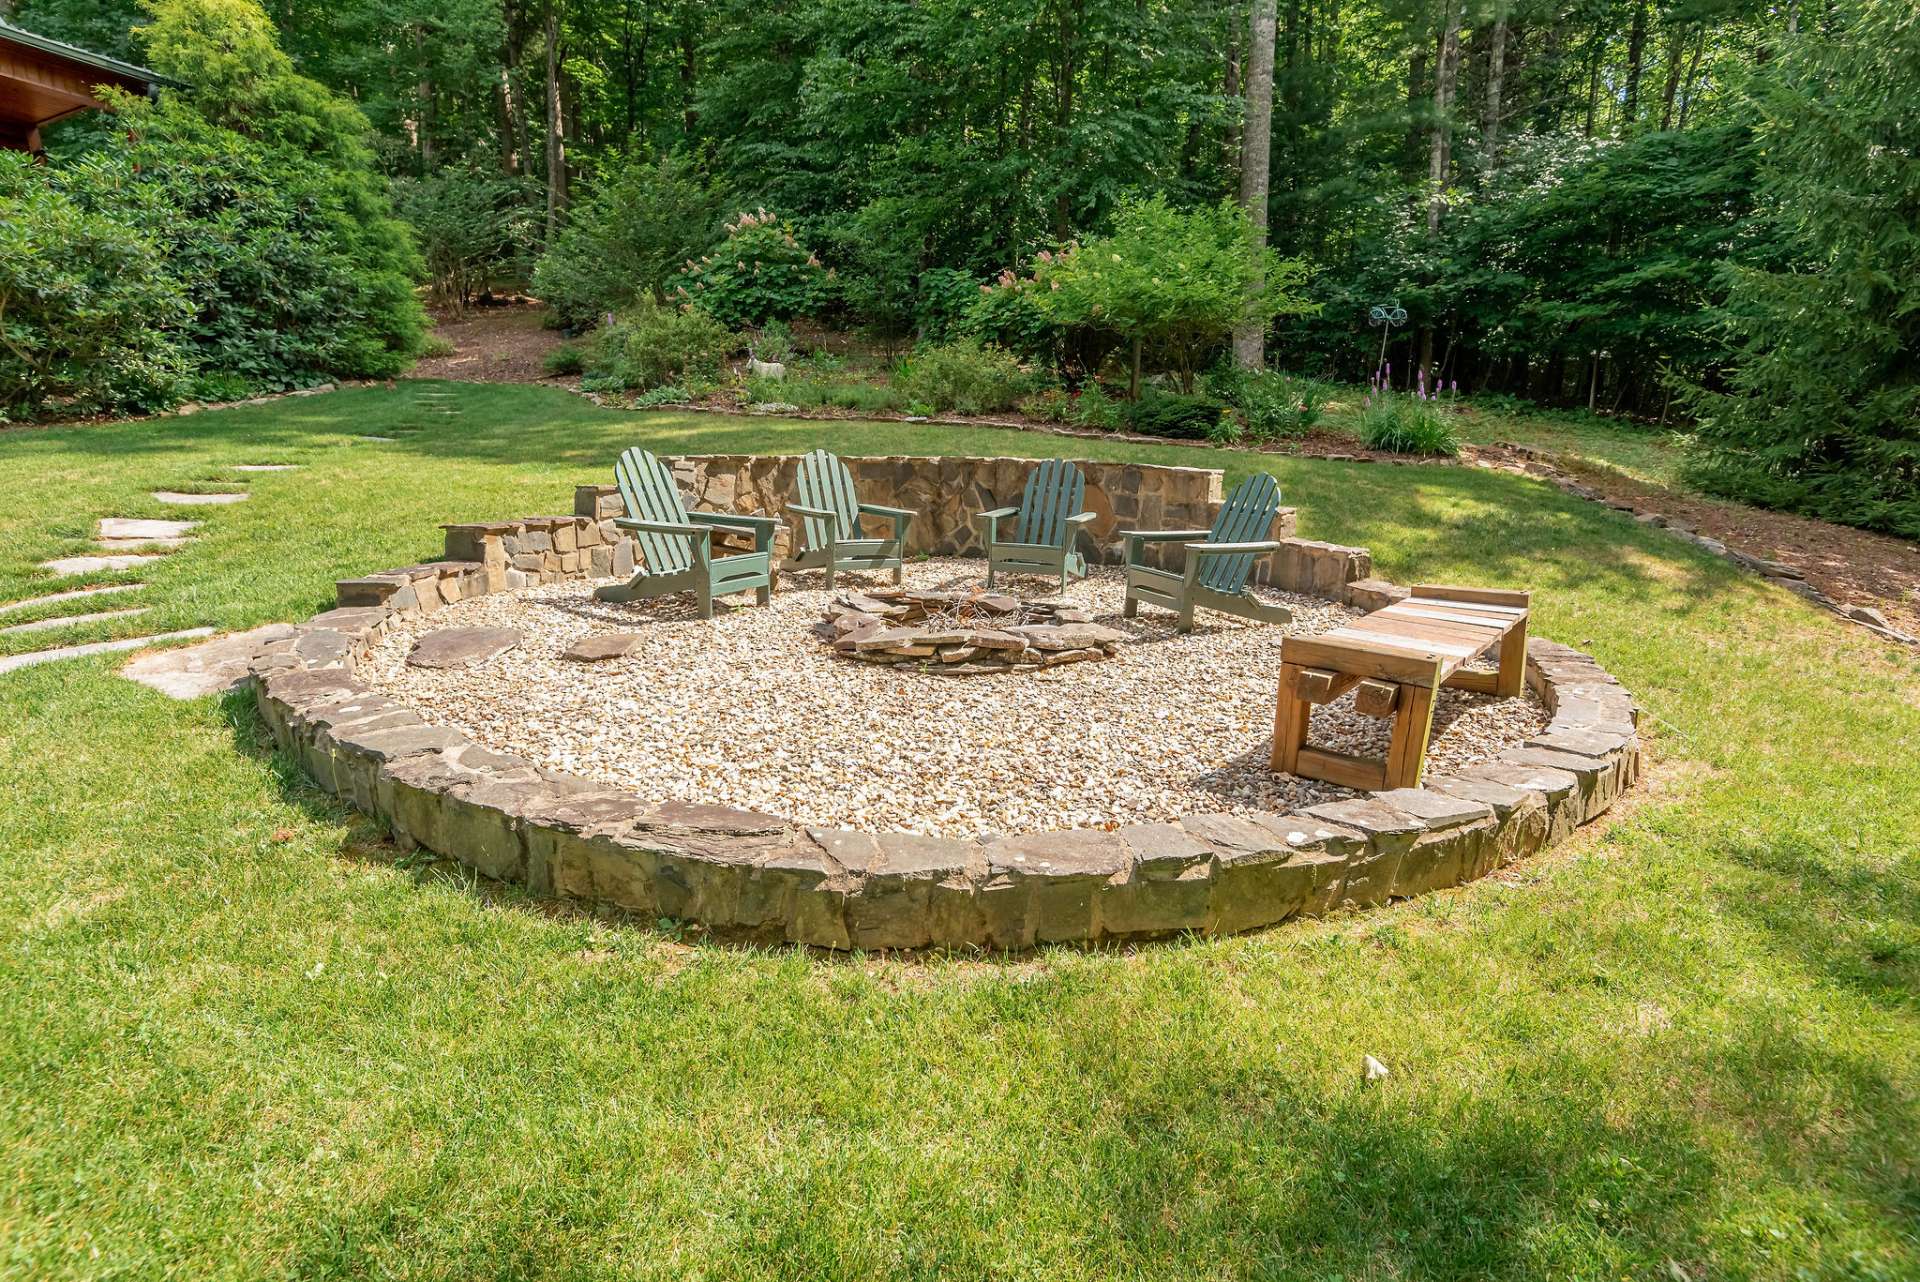 You'll never tire of sitting around the fire and roasting marshmallows on this large fire pit out front.